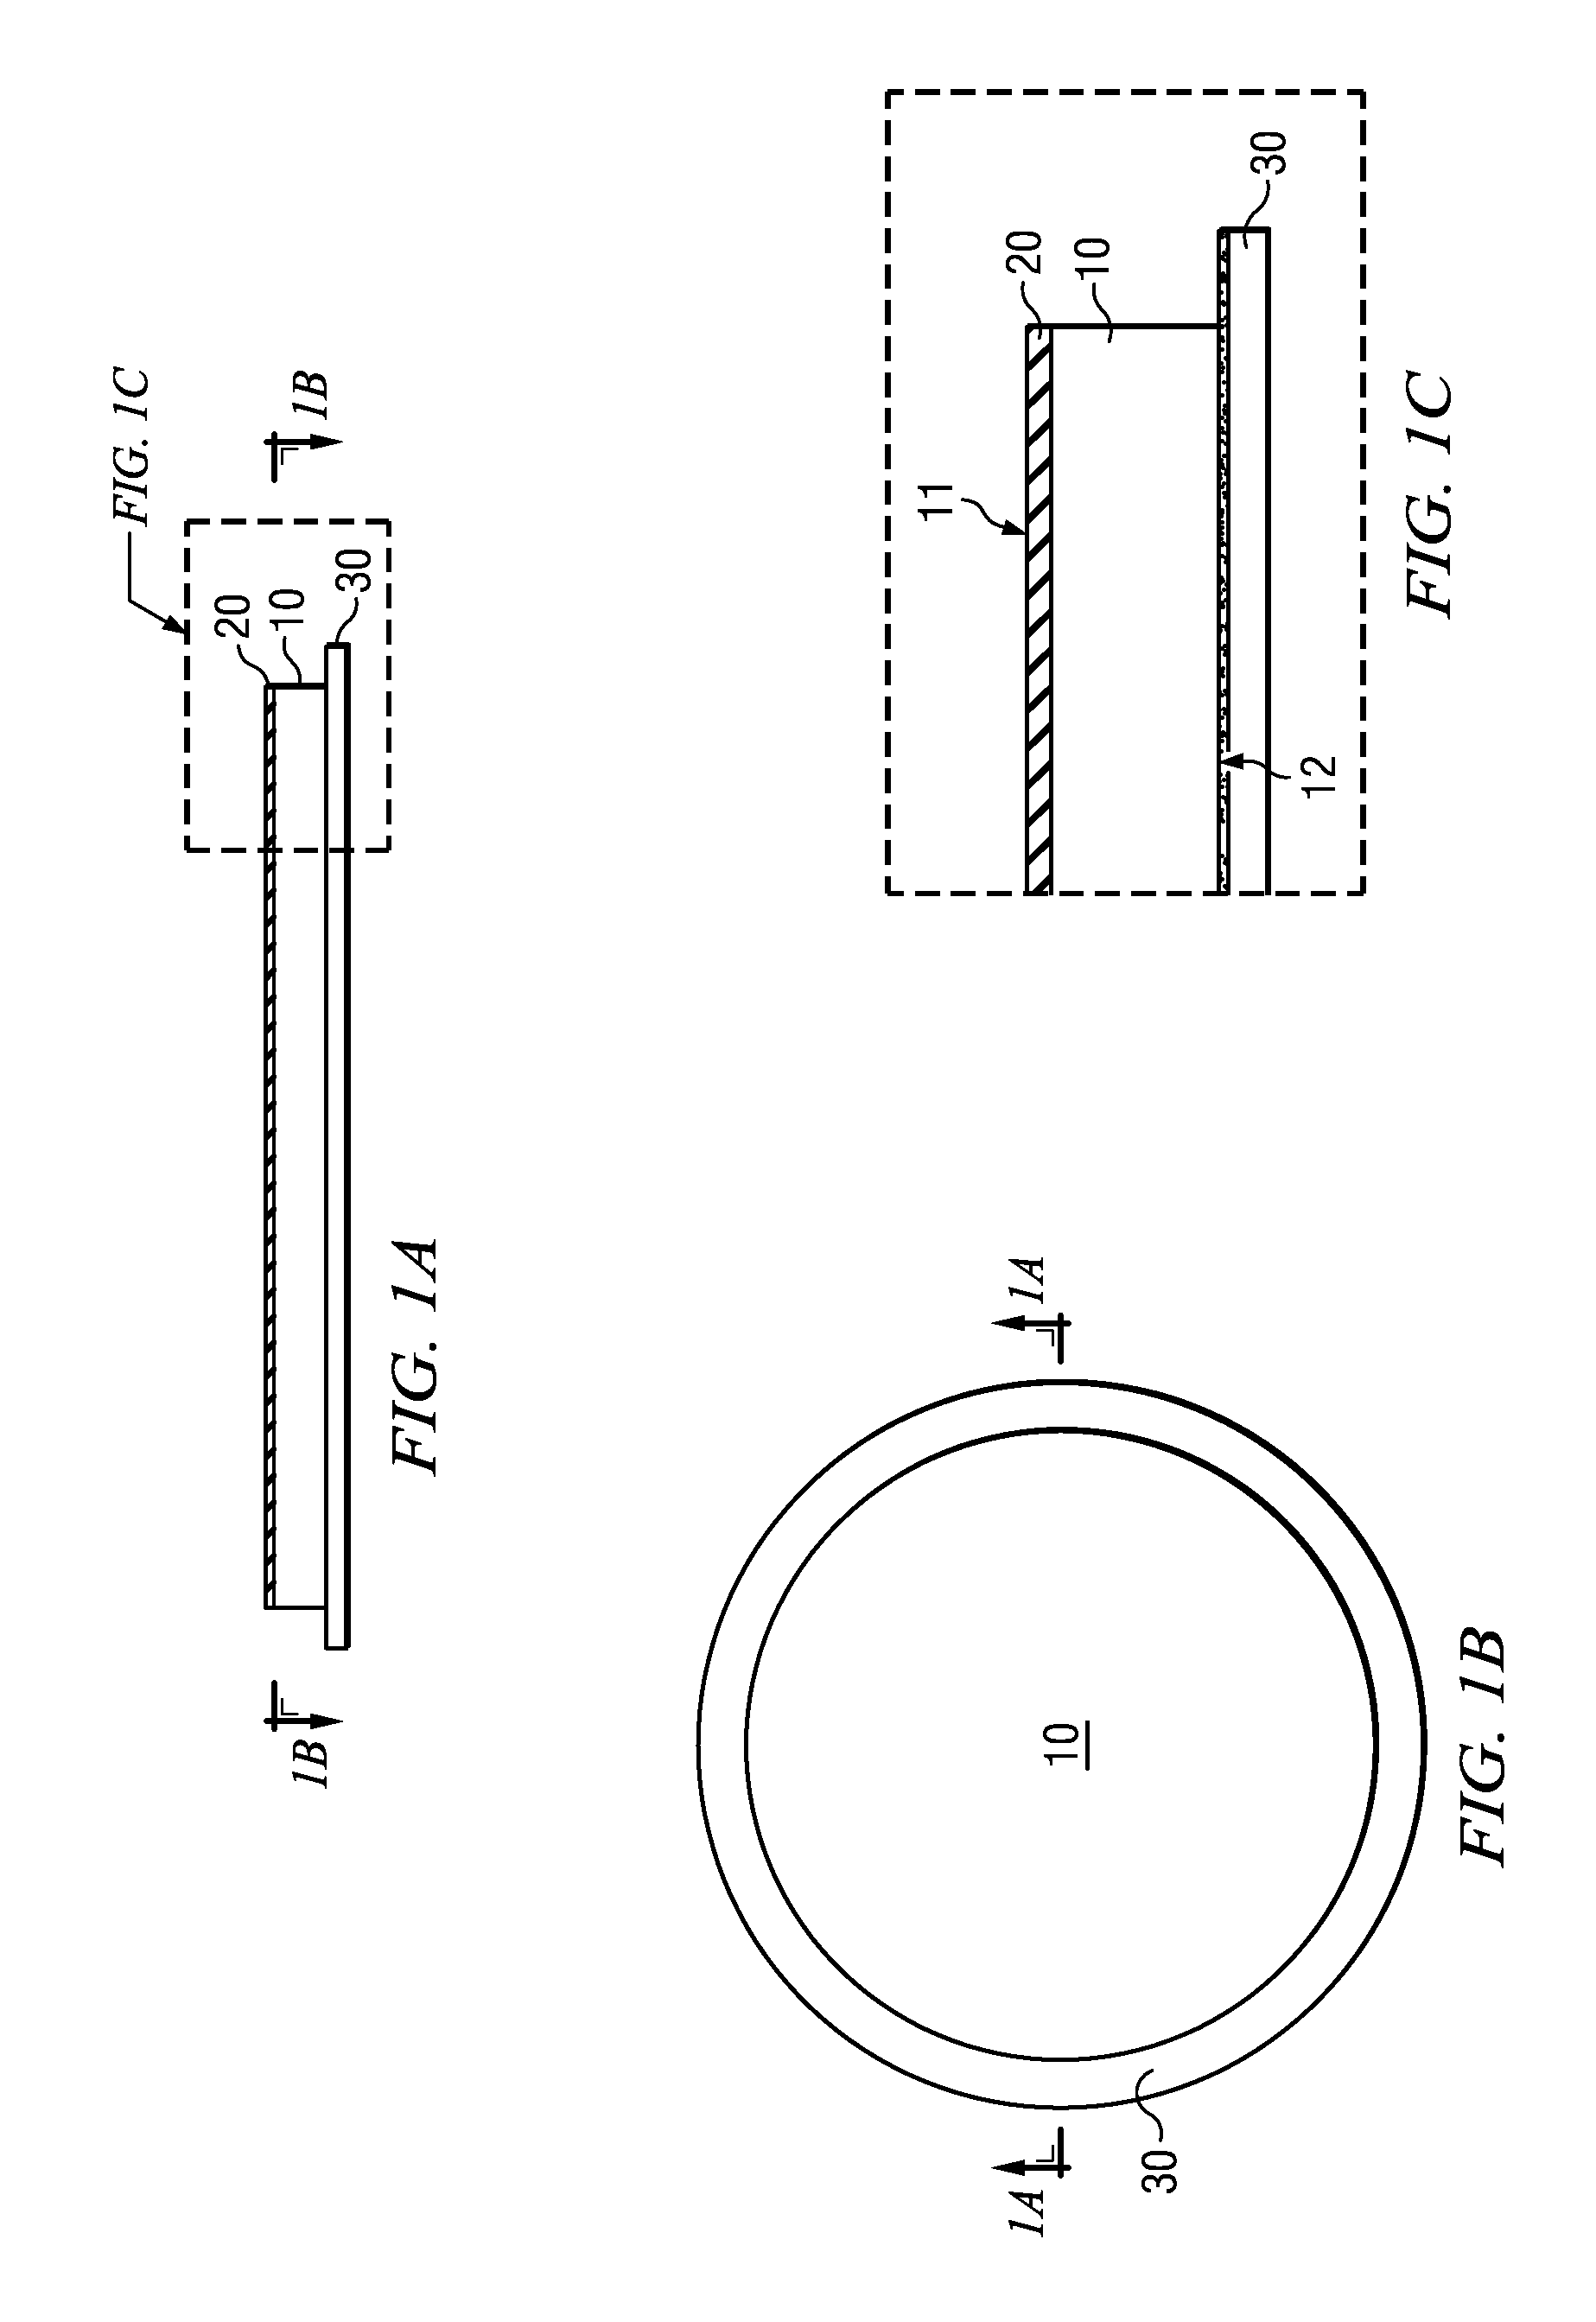 Separation of semiconductor devices from a wafer carrier